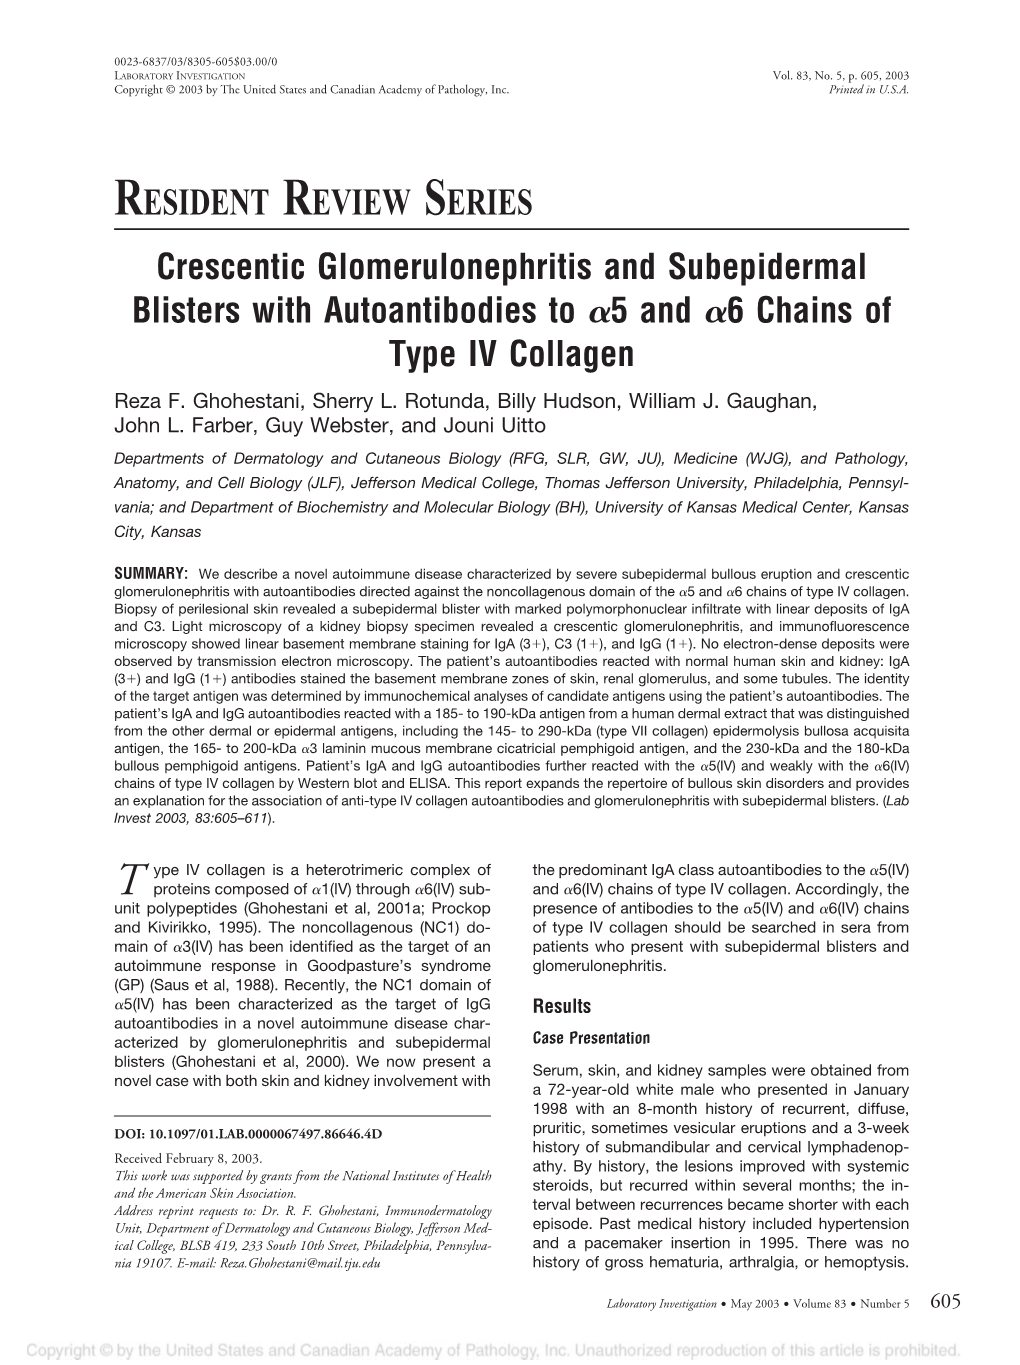 RESIDENT REVIEW SERIES Crescentic Glomerulonephritis and Subepidermal Blisters with Autoantibodies to 5 and 6 Chains of Type IV Collagen